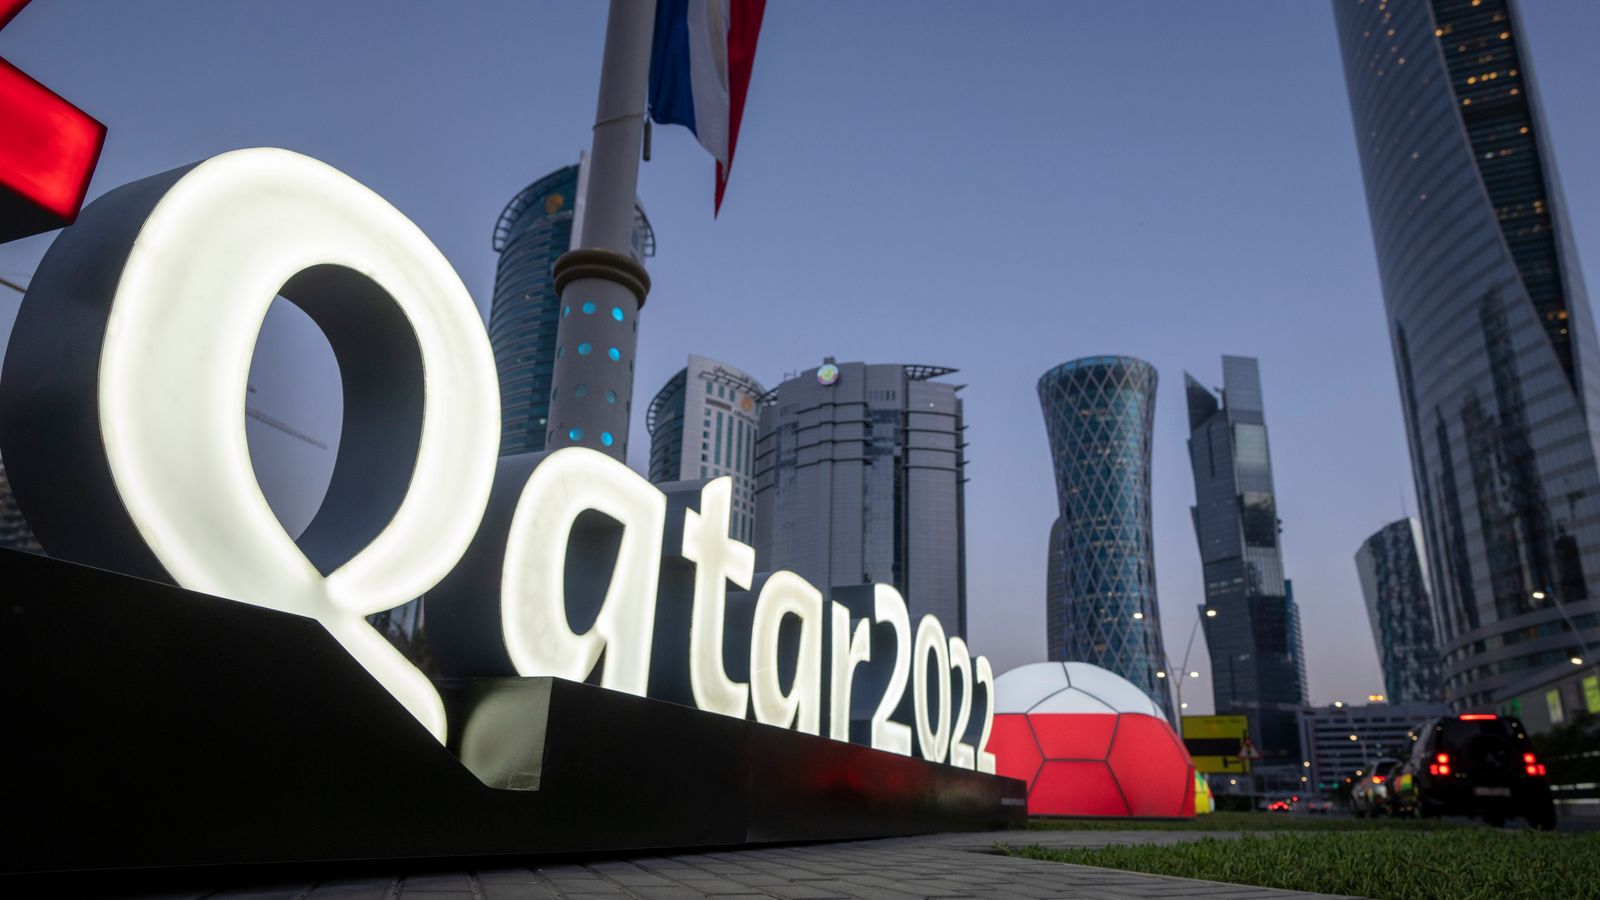 Qatar 'conscripting civilians and summoning diplomats from abroad' to do World Cup security